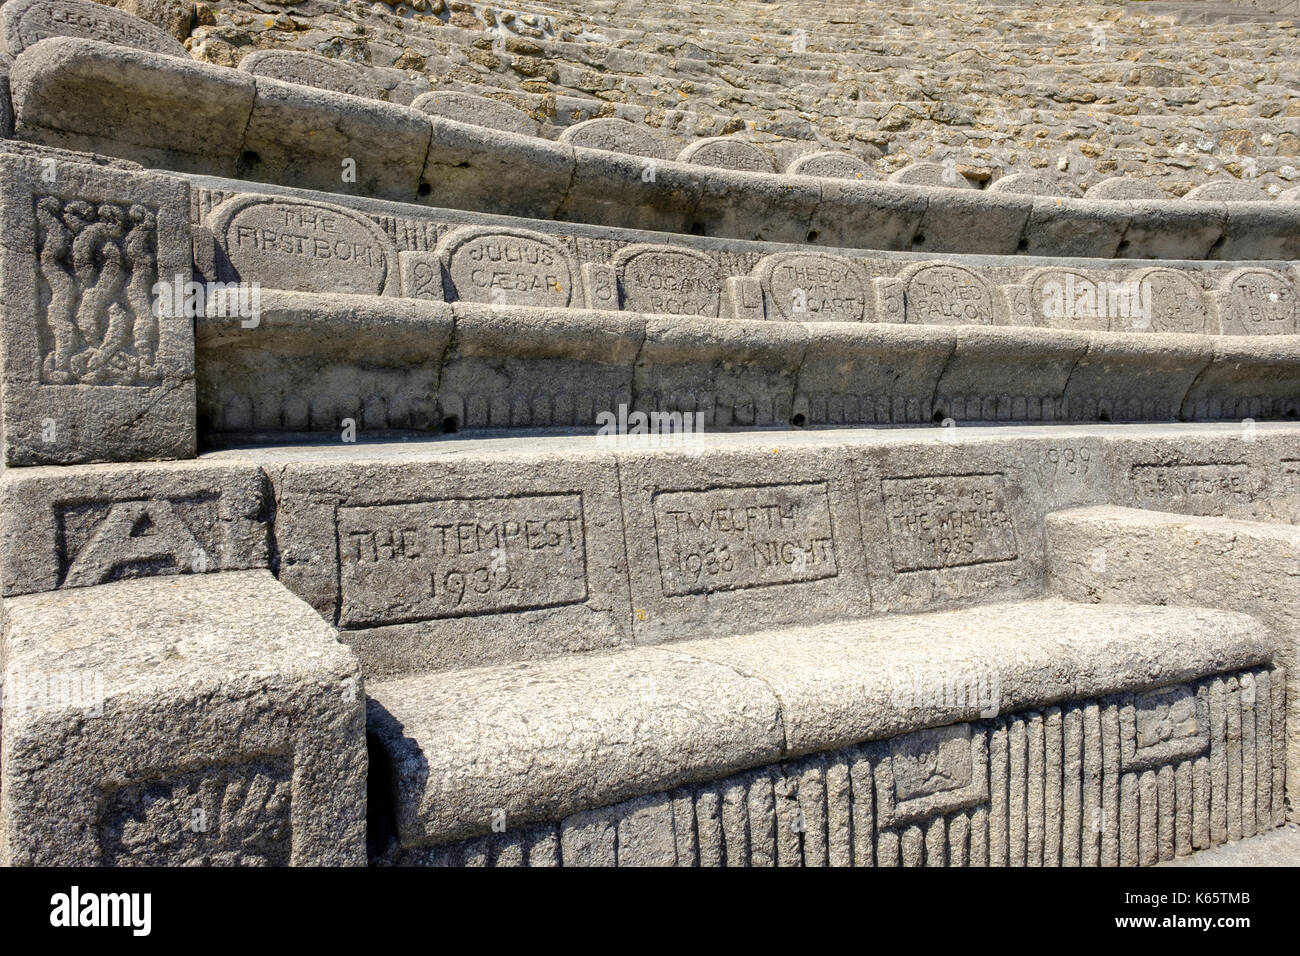 Inscribed seat backrests, Minack Theatre, Porthcurno, Cornwall, Cornwall, England, Great Britain Stock Photo